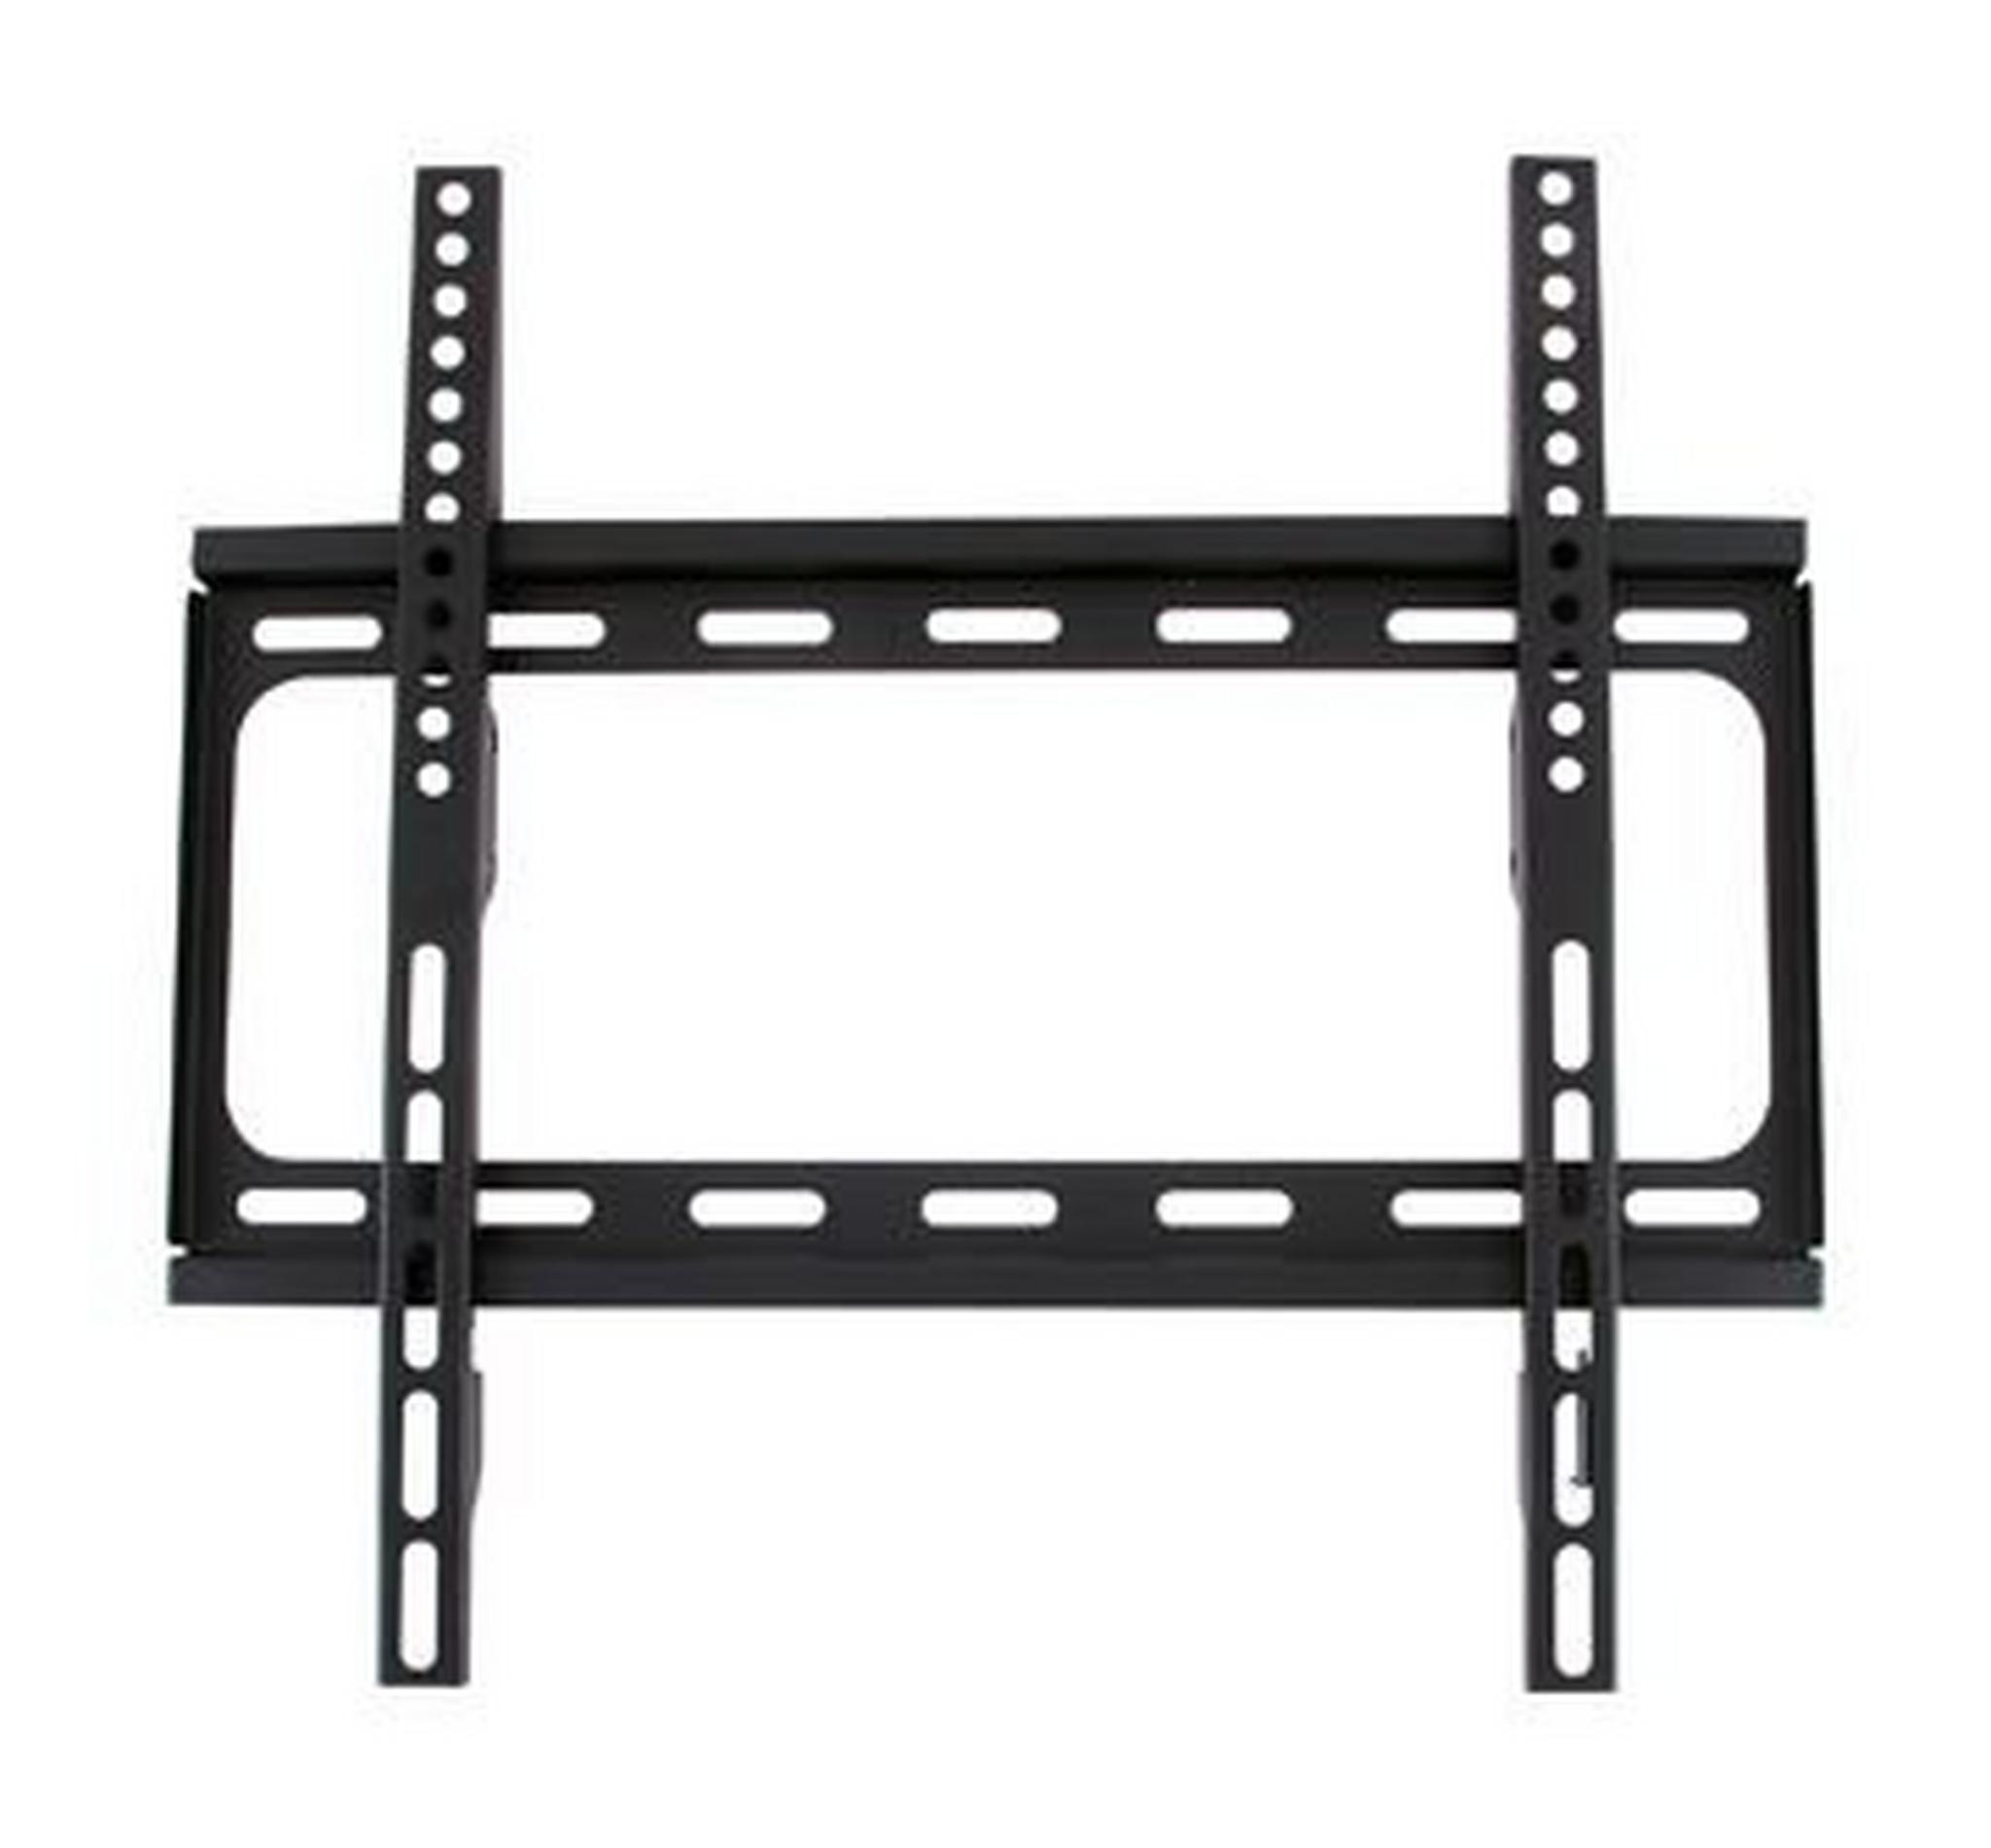 Wansa Fixed Wall Bracket for 26 to 50-inch TVs - (PSW698SF) Black